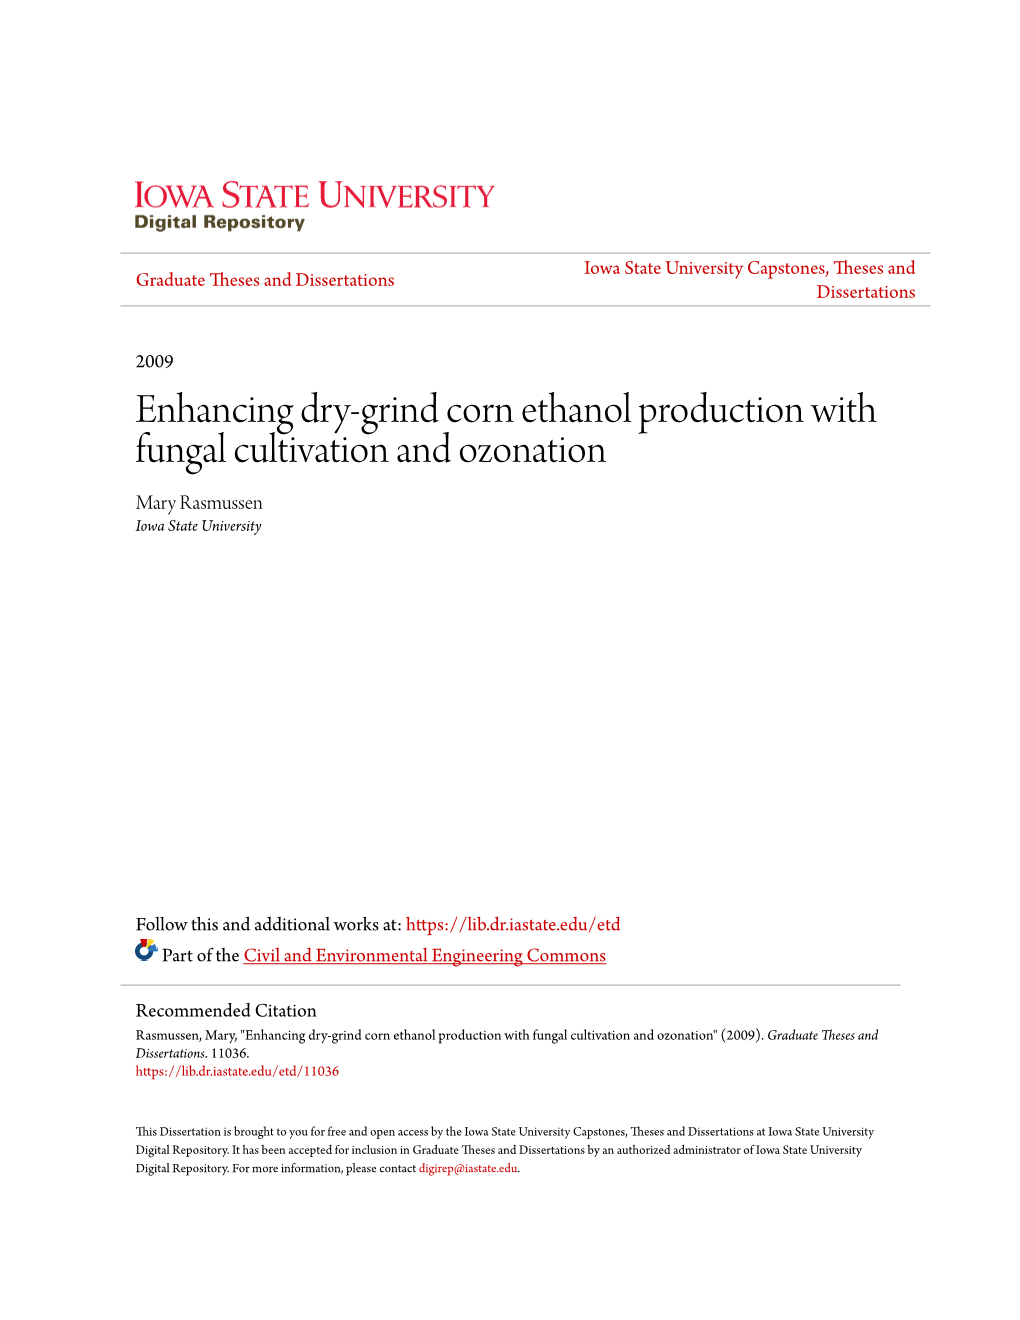 Enhancing Dry-Grind Corn Ethanol Production with Fungal Cultivation and Ozonation Mary Rasmussen Iowa State University